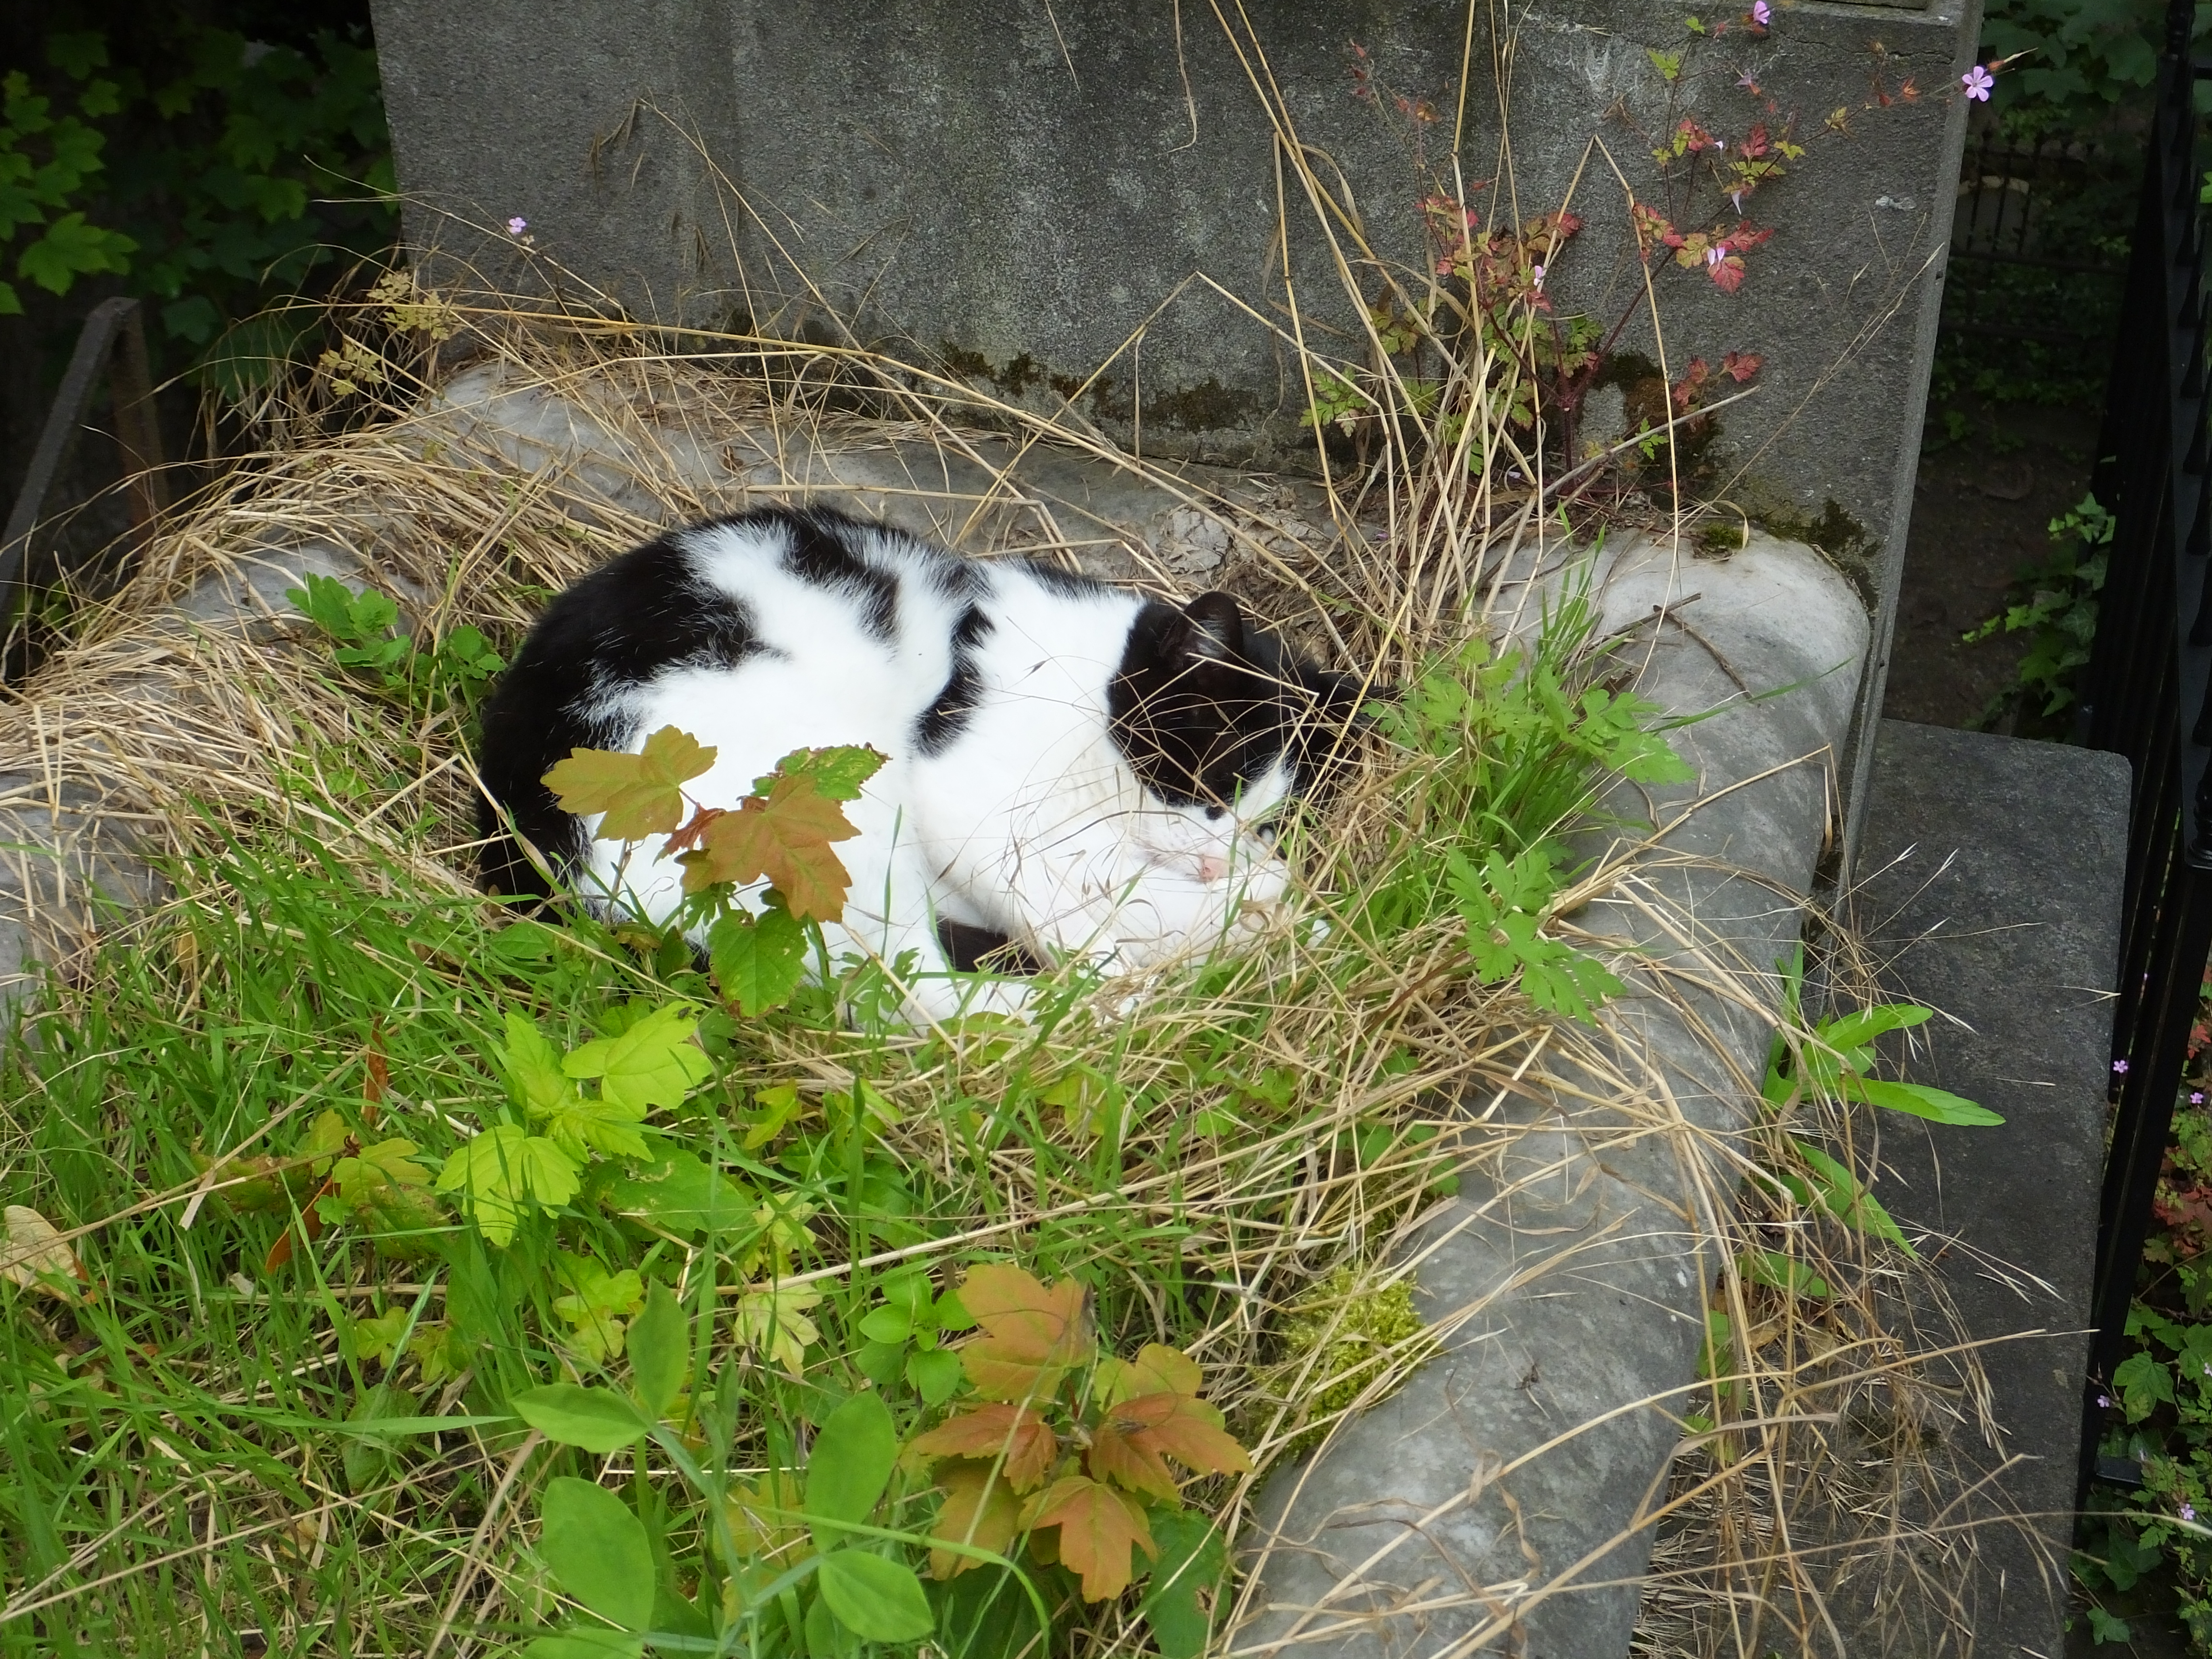 A cat nestled in one of the abandoned sites